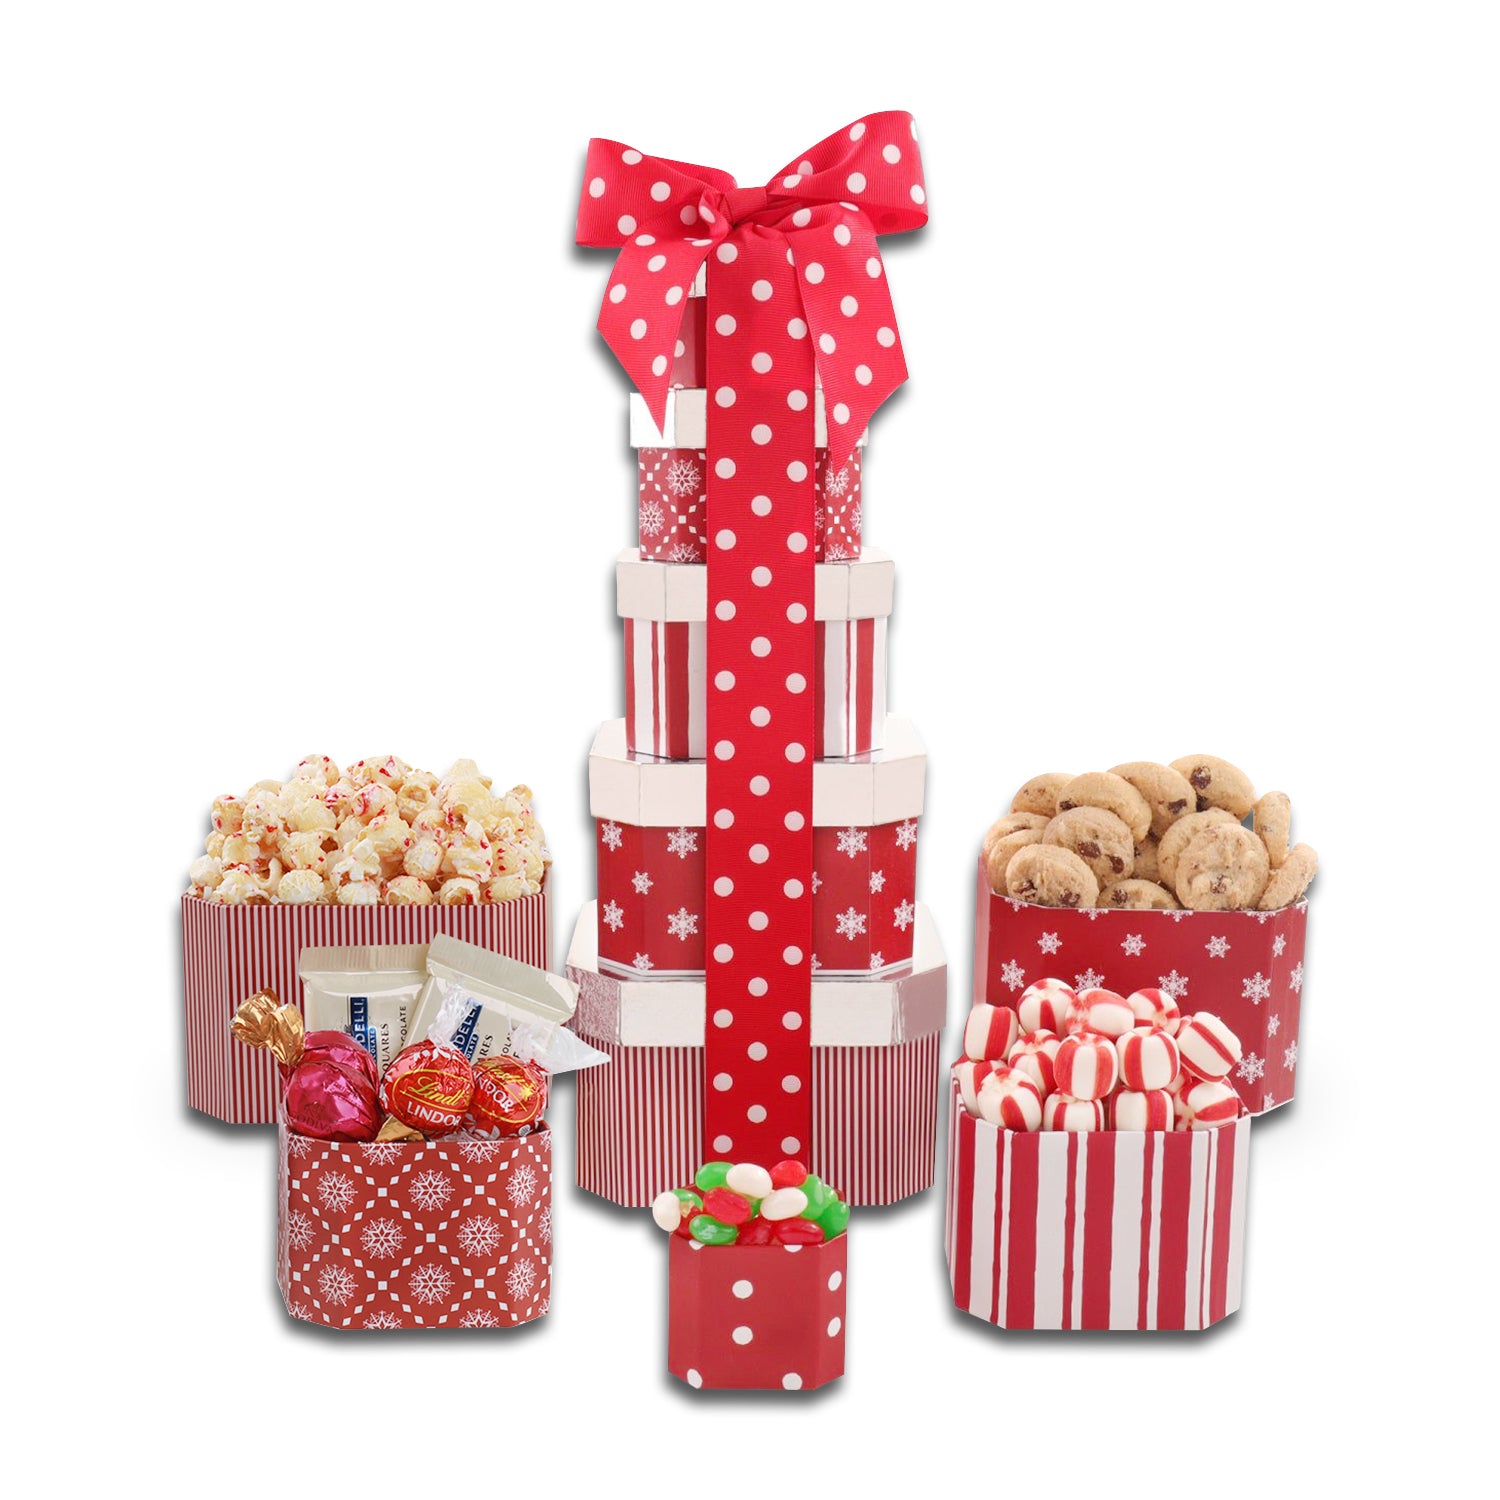 Candy Cane Popcorn (3oz.), Chocolate Chip Cookies (3.5oz.), Peppermint Puffs (2.2oz.), Lindt Lindor Milk Chocolate Truffle (2pcs.), Ghirardelli White Chocolate Caramel Filled Tasting Square (2pcs.), Godiva Milk Chocolate Truffle (2pcs.), Jelly Belly Reindeer Corn Candy (1oz.), 5-High Octagonal Holiday Tower